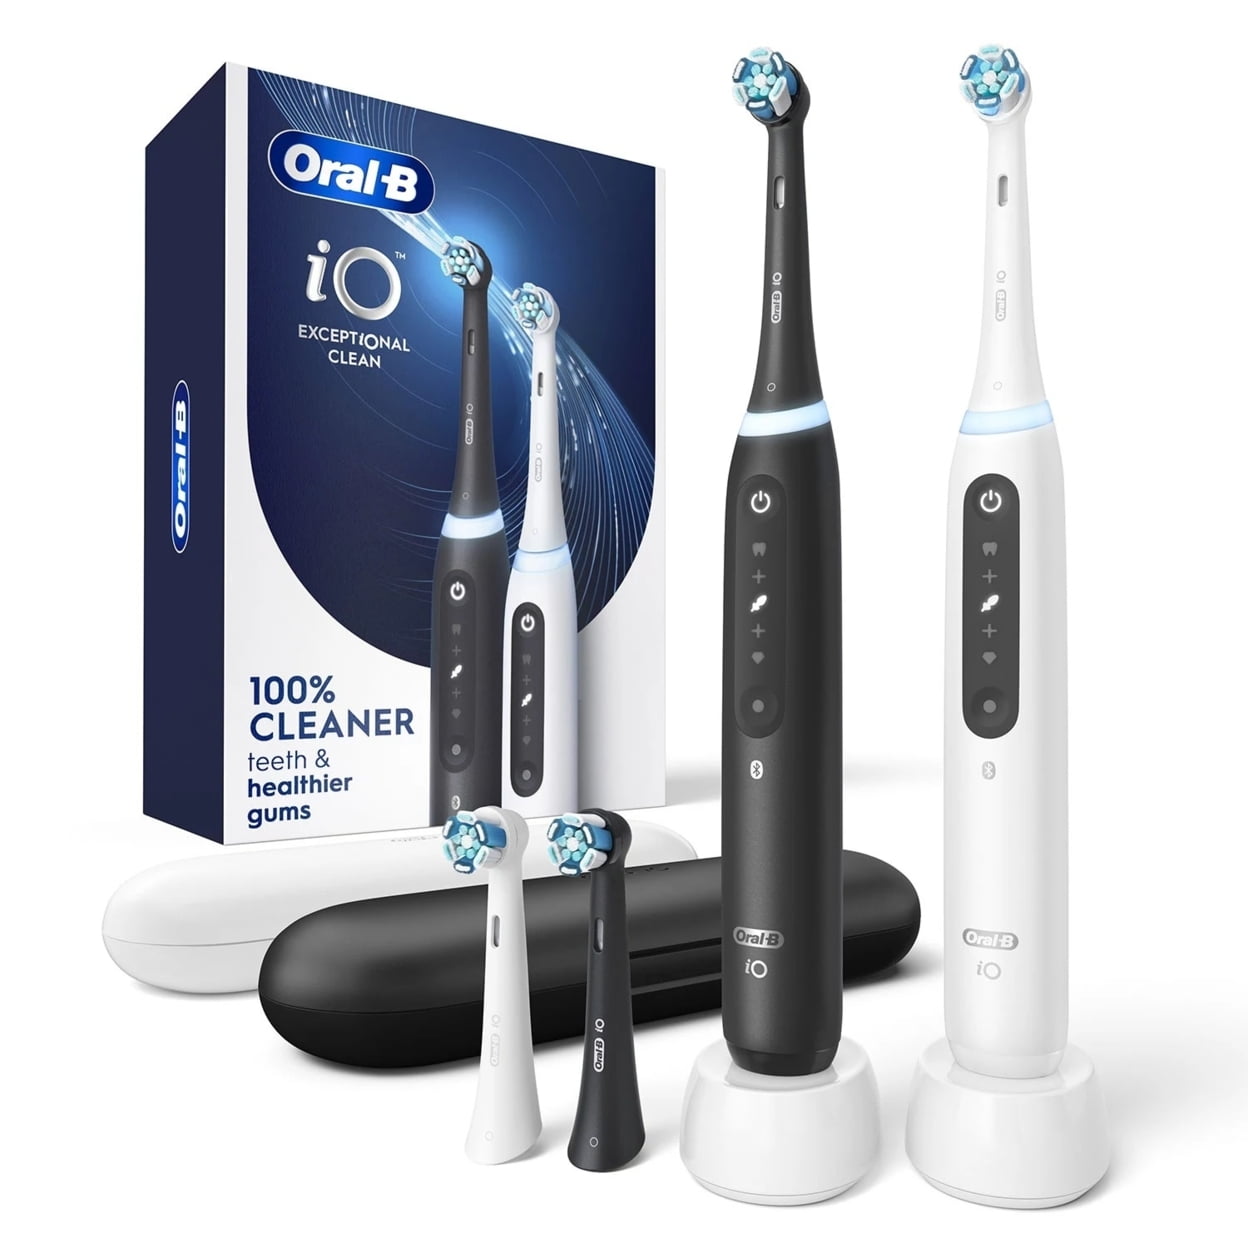 Oral-B Toothbrush Pack iO Series Rechargeable 5 Dual